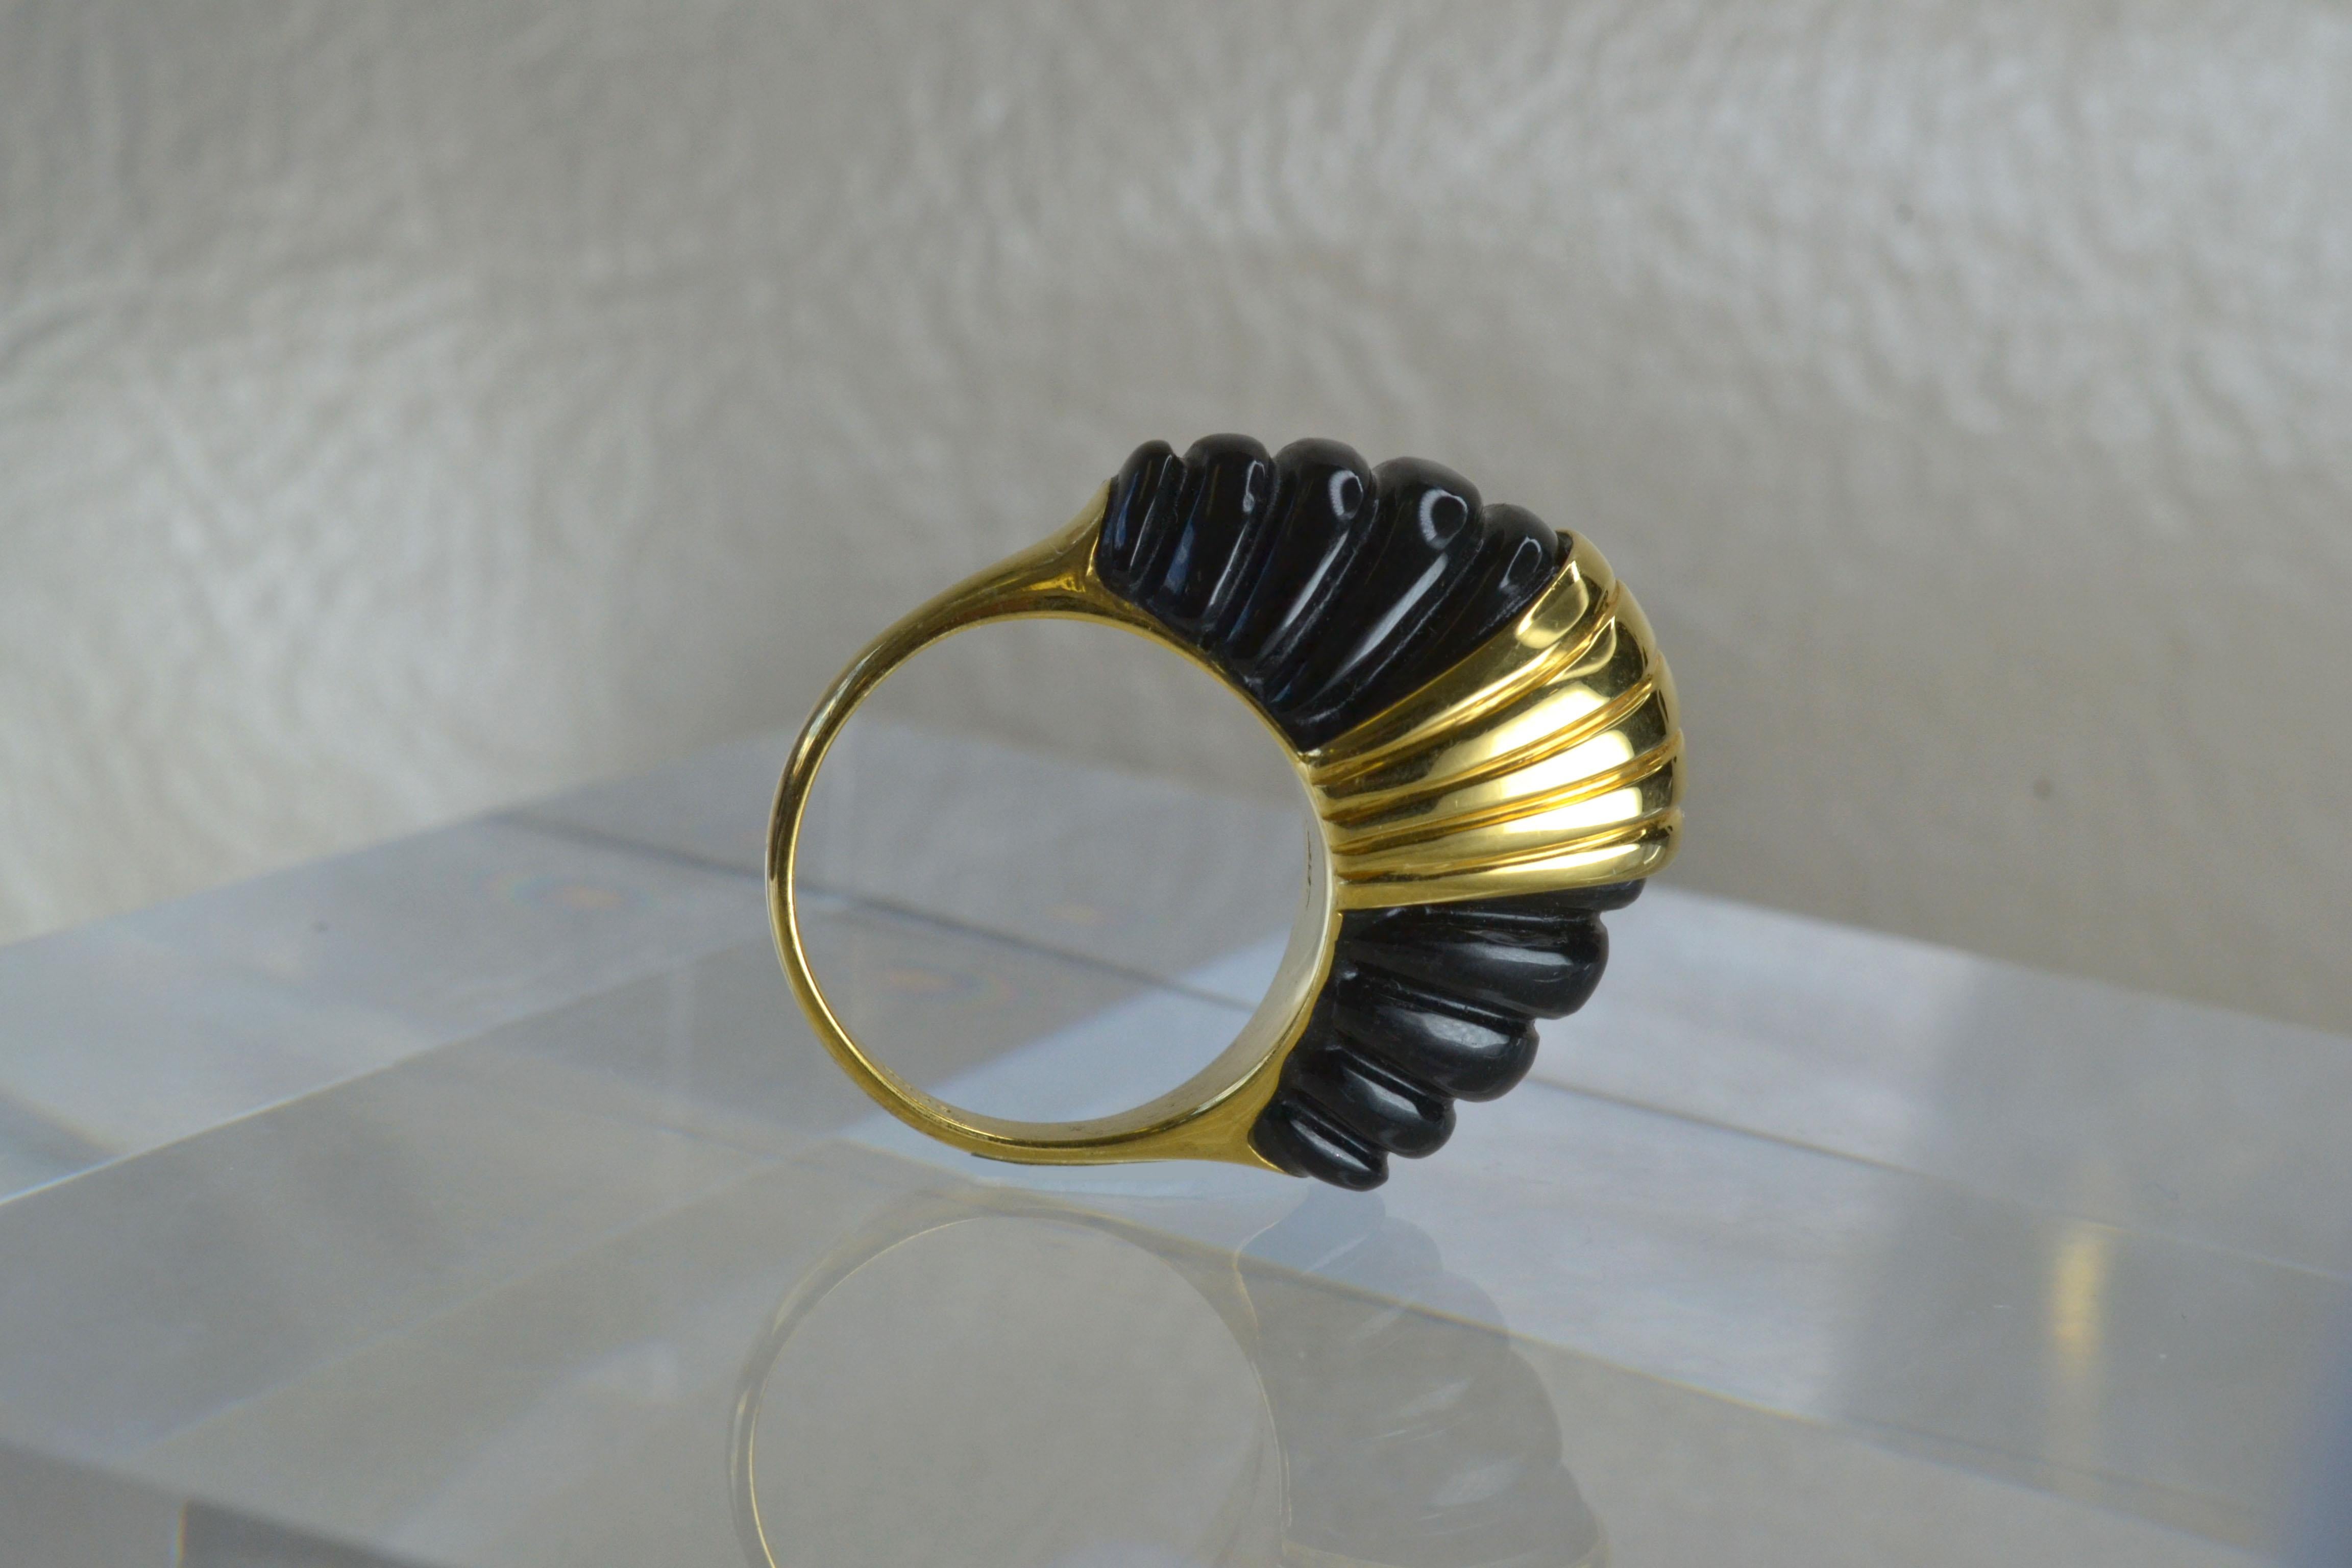 Vintage 14k Gold Scalloped Onyx Ring One-of-a-kind

This vintage, scalloped onyx and 14k gold ring would look perfect with any outfit. Made in the 1980s, it comfortably fits a size O 1/2 finger!

Vintage from the 1980s 
Size: O 1/2 UK/AU 
Materials: